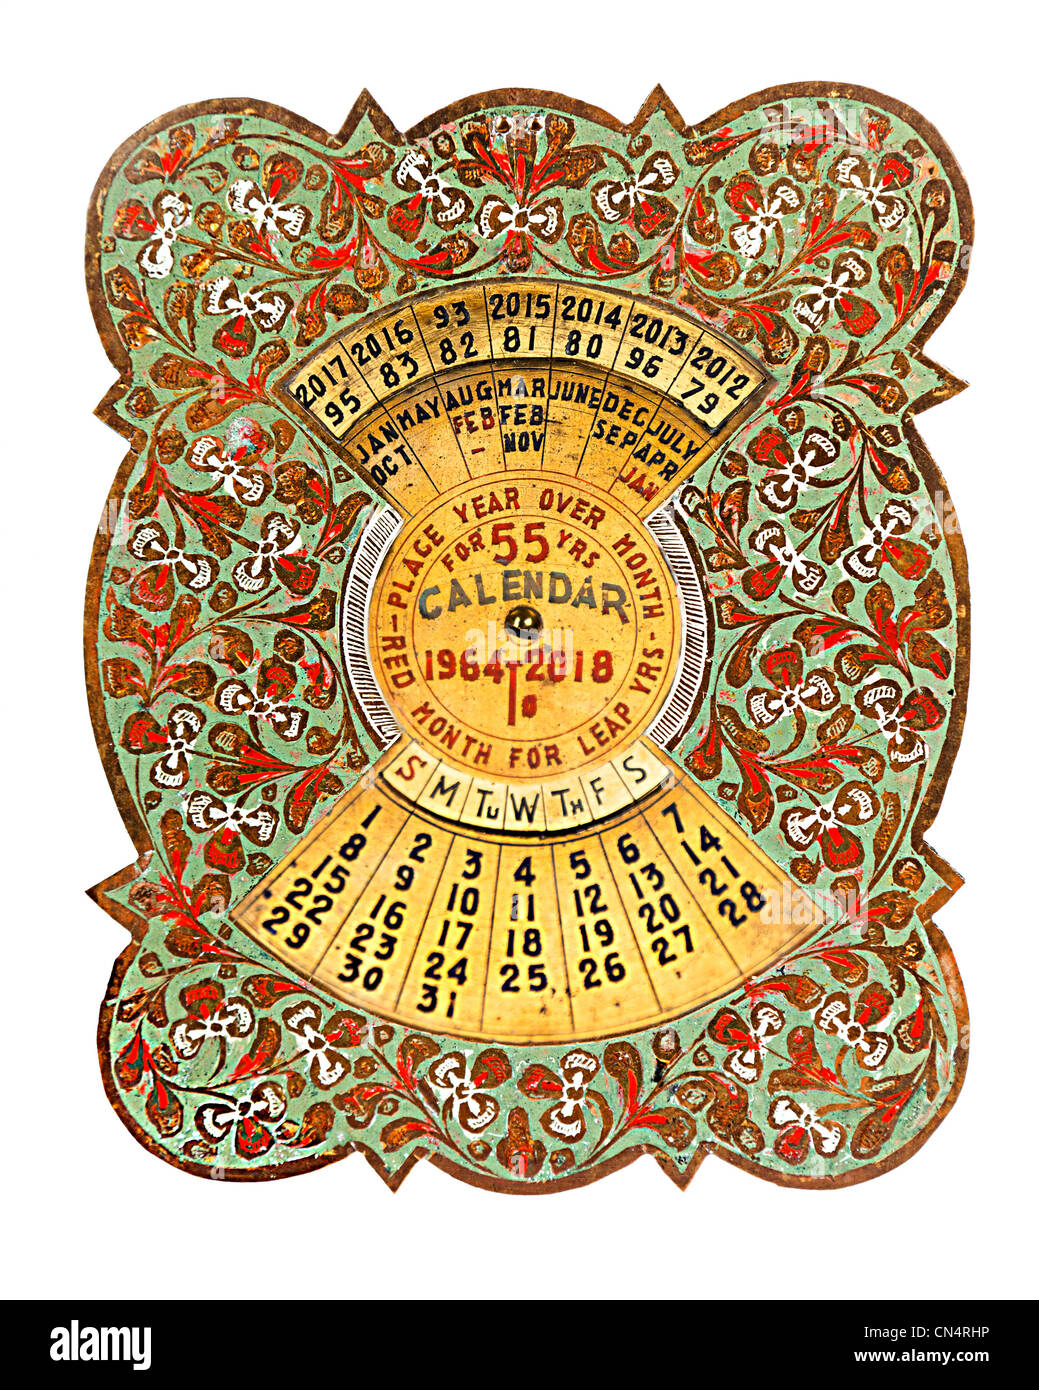 antique-perpetual-calendar-made-in-metal-covering-the-years-from-1964